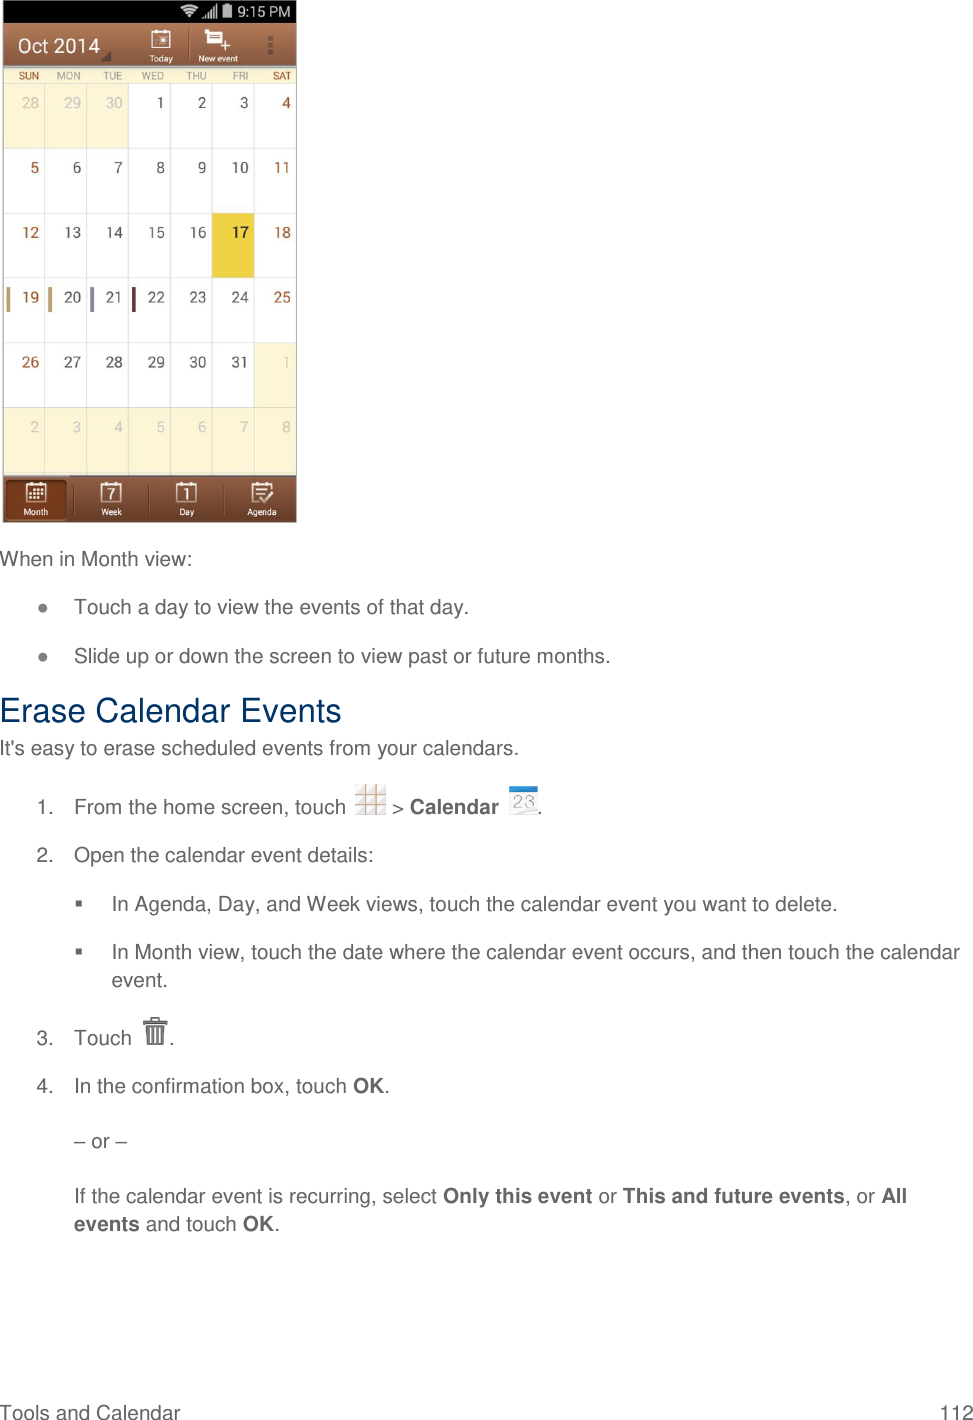 Tools and Calendar  112  When in Month view: ● Touch a day to view the events of that day. ● Slide up or down the screen to view past or future months. Erase Calendar Events It&apos;s easy to erase scheduled events from your calendars. 1.  From the home screen, touch   &gt; Calendar  . 2.  Open the calendar event details:   In Agenda, Day, and Week views, touch the calendar event you want to delete.   In Month view, touch the date where the calendar event occurs, and then touch the calendar event. 3.  Touch  . 4.  In the confirmation box, touch OK.  – or –  If the calendar event is recurring, select Only this event or This and future events, or All events and touch OK. 